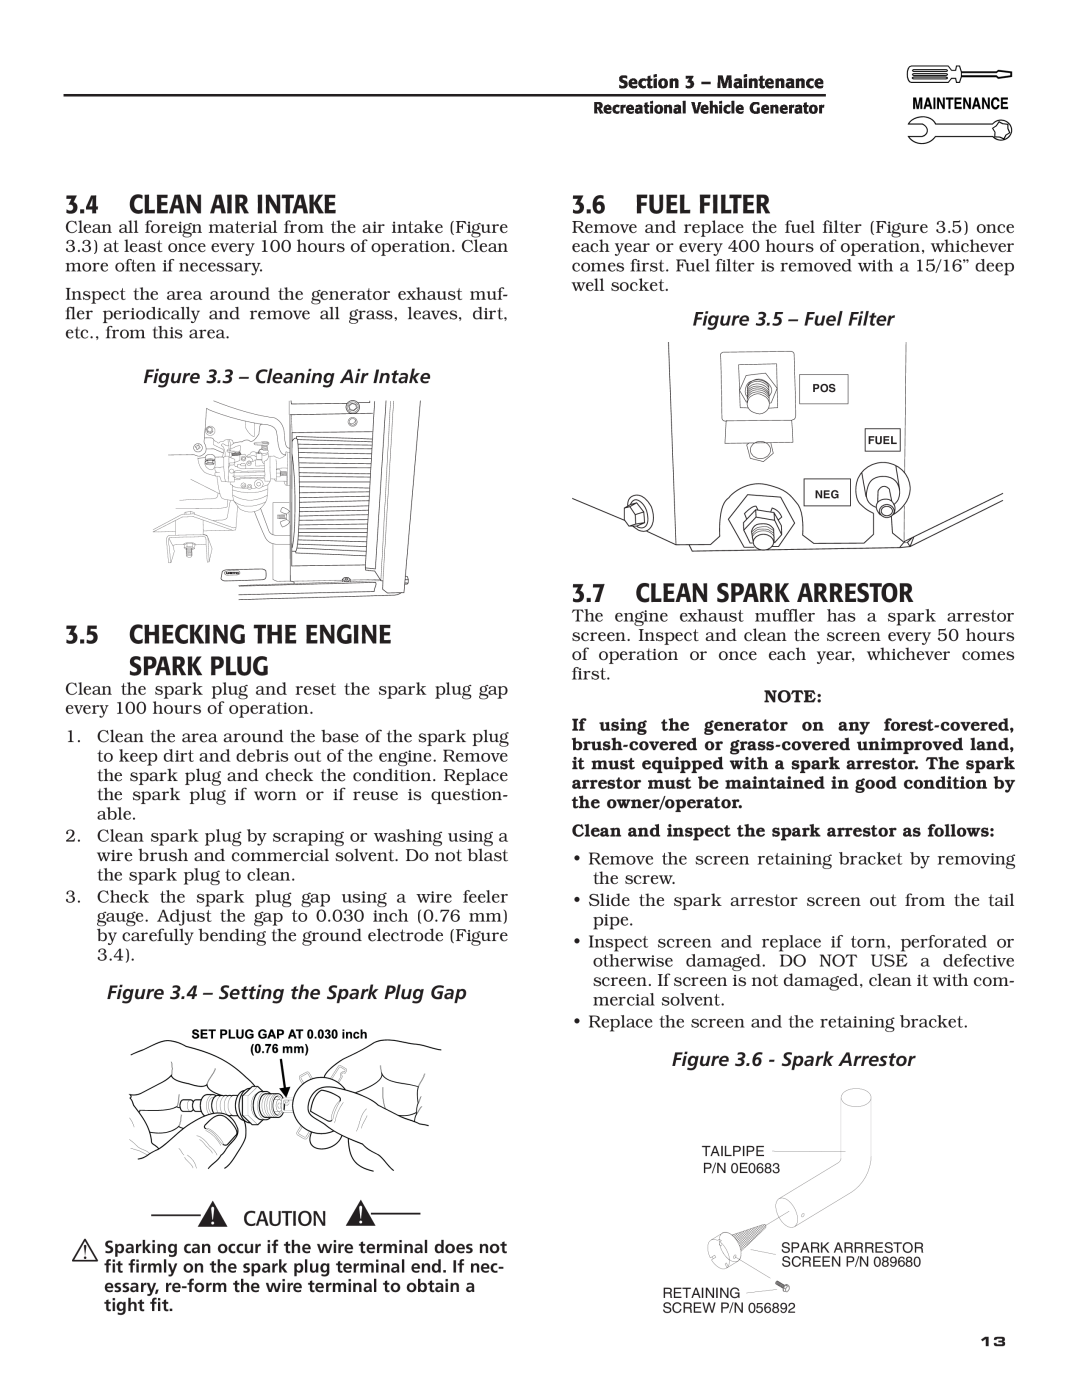 Generac Power Systems 004700-00 Clean Air Intake, Checking The Engine Spark Plug, Fuel Filter, Clean Spark Arrestor 